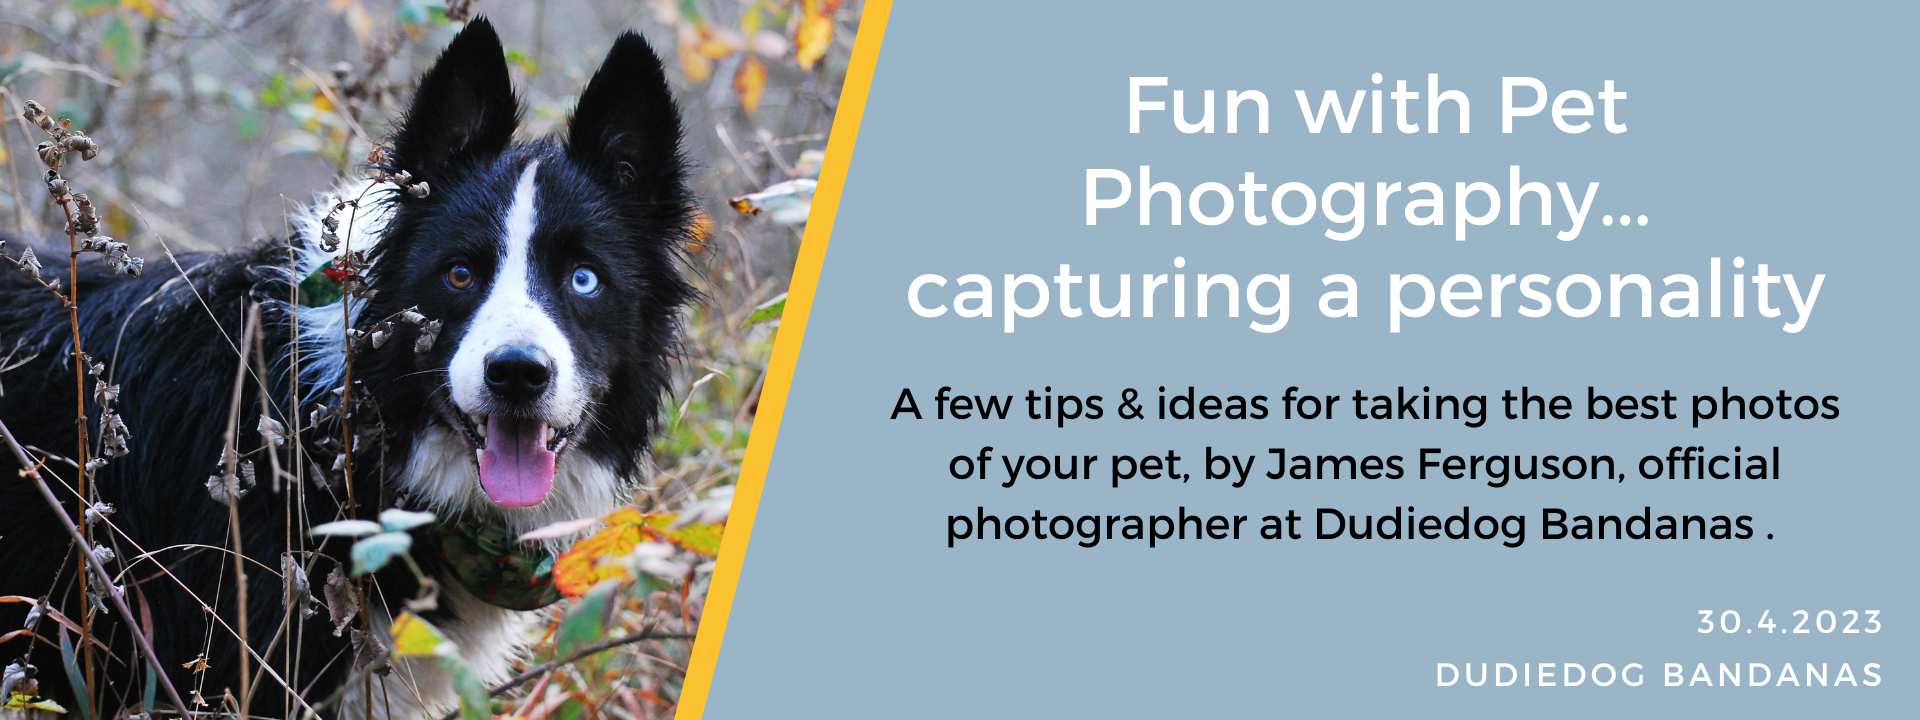 Fun with photography...capturing your pet's personality